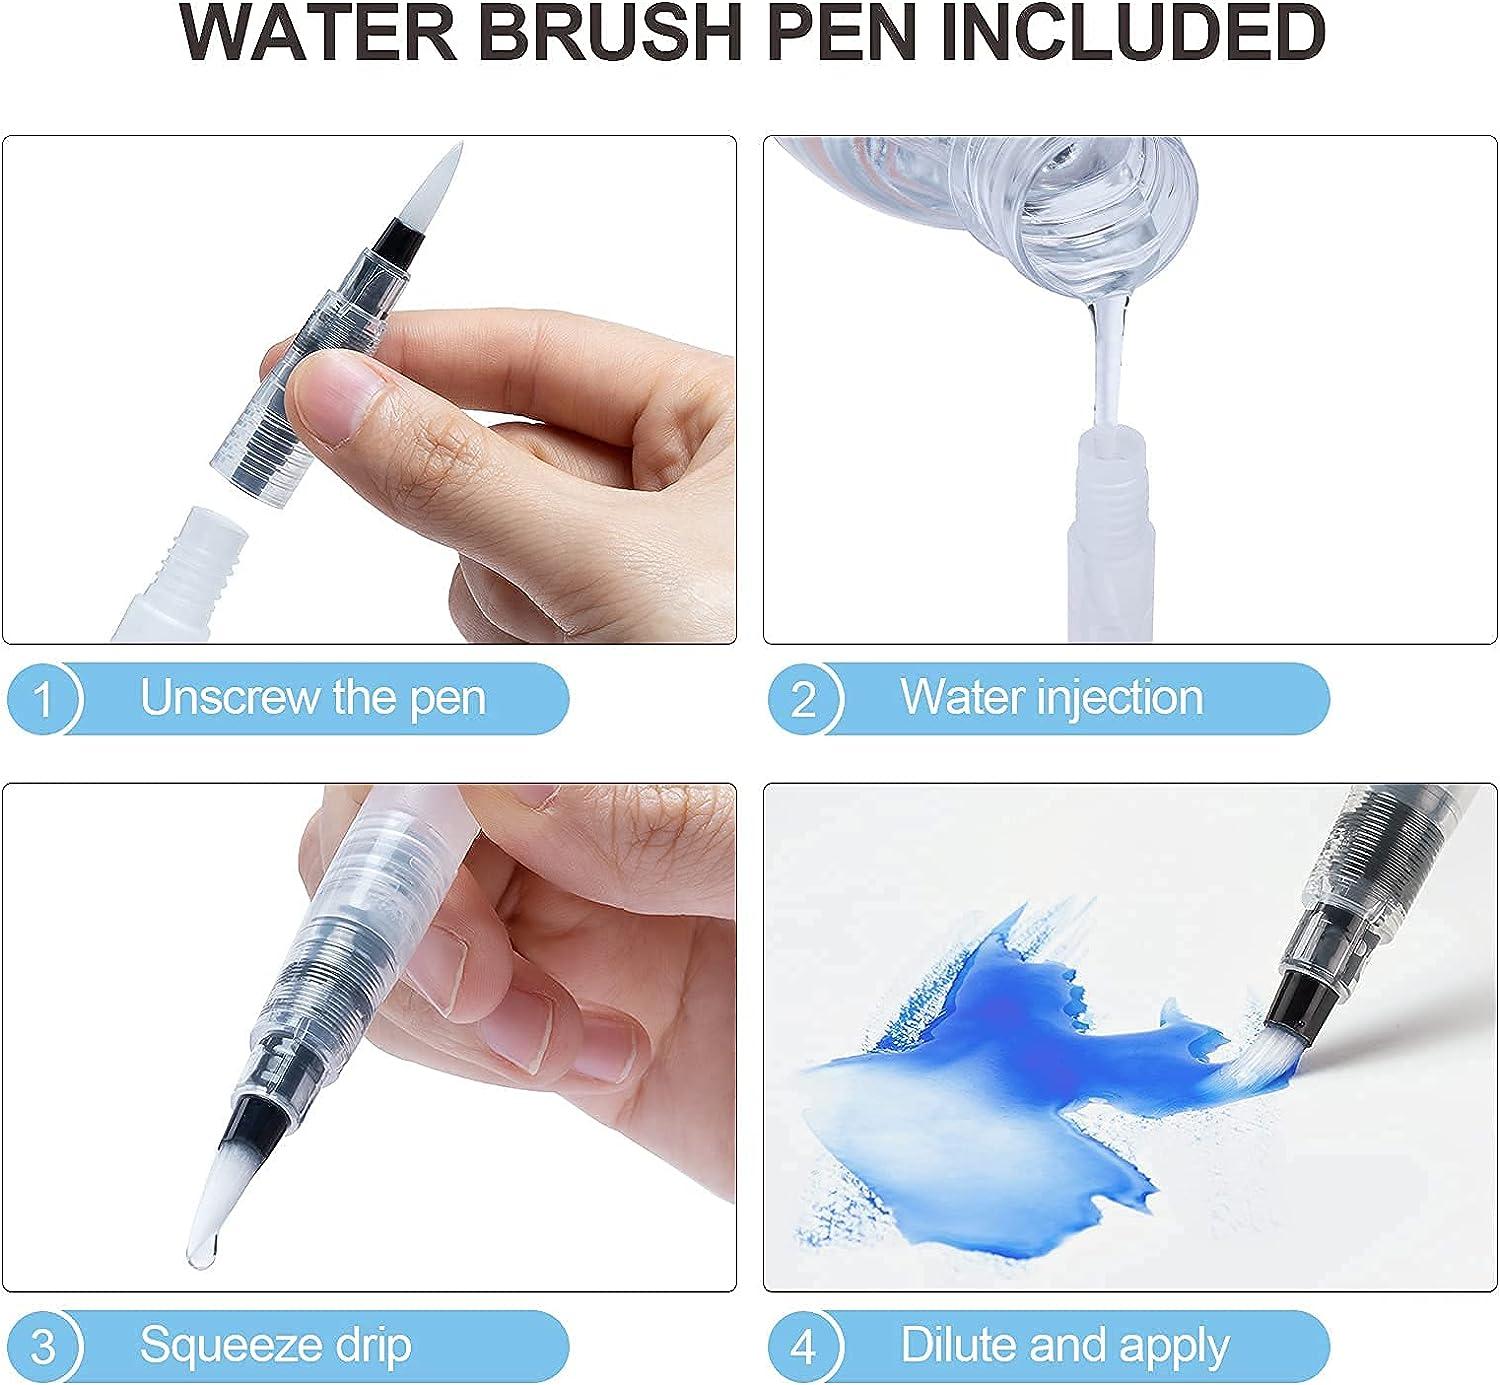 How to: use brush pens 